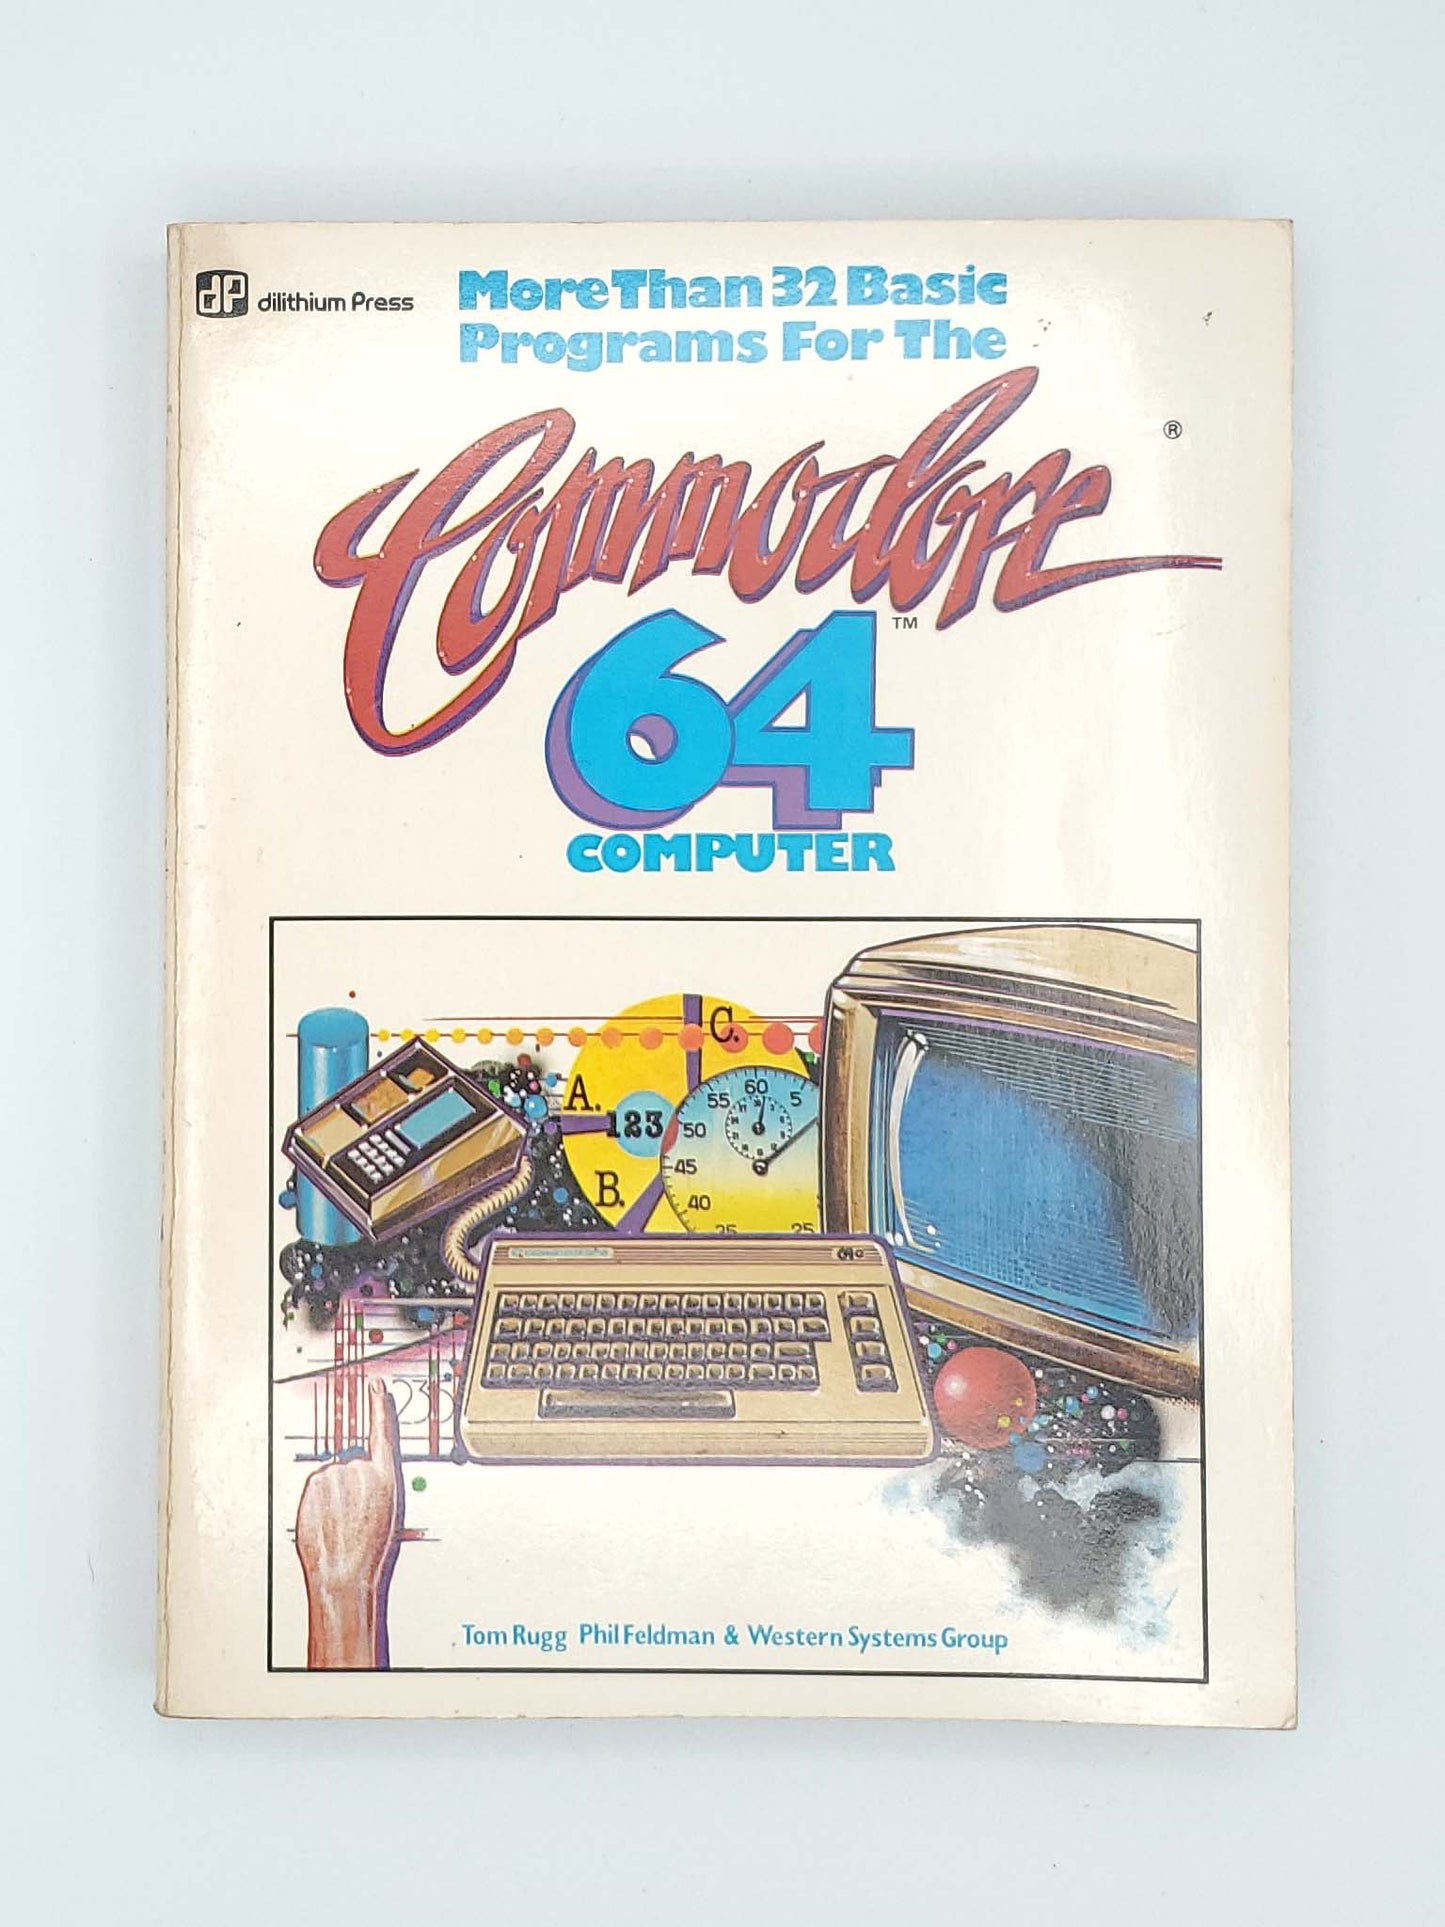 More than 32 BASIC Programs for the Commodore 64 Computer